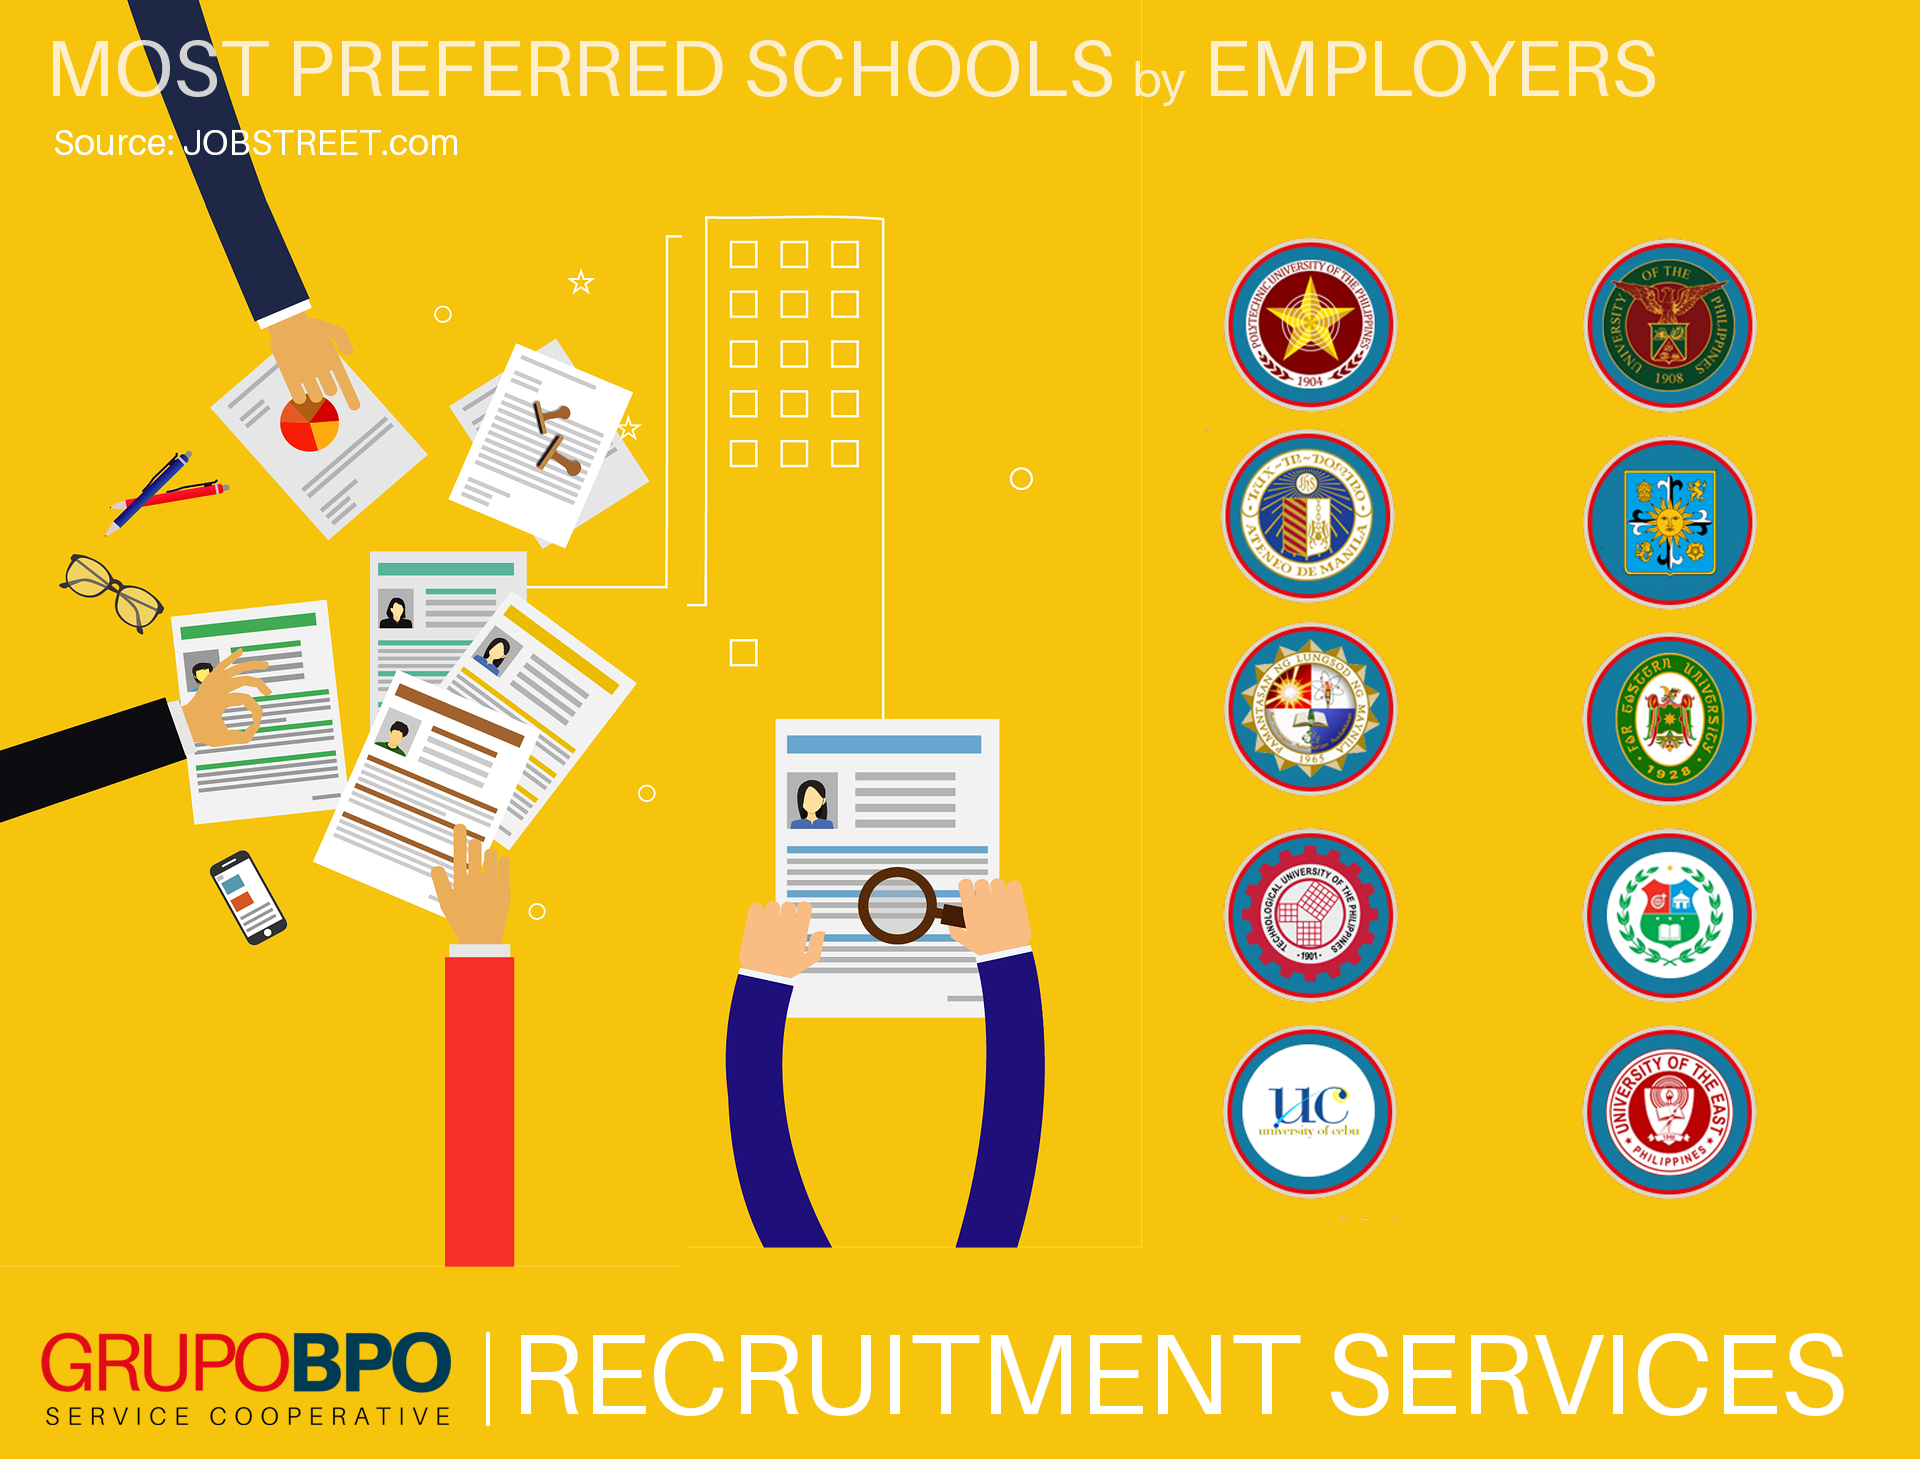 Recruitment Firms in the Philippines Source from Top Schools